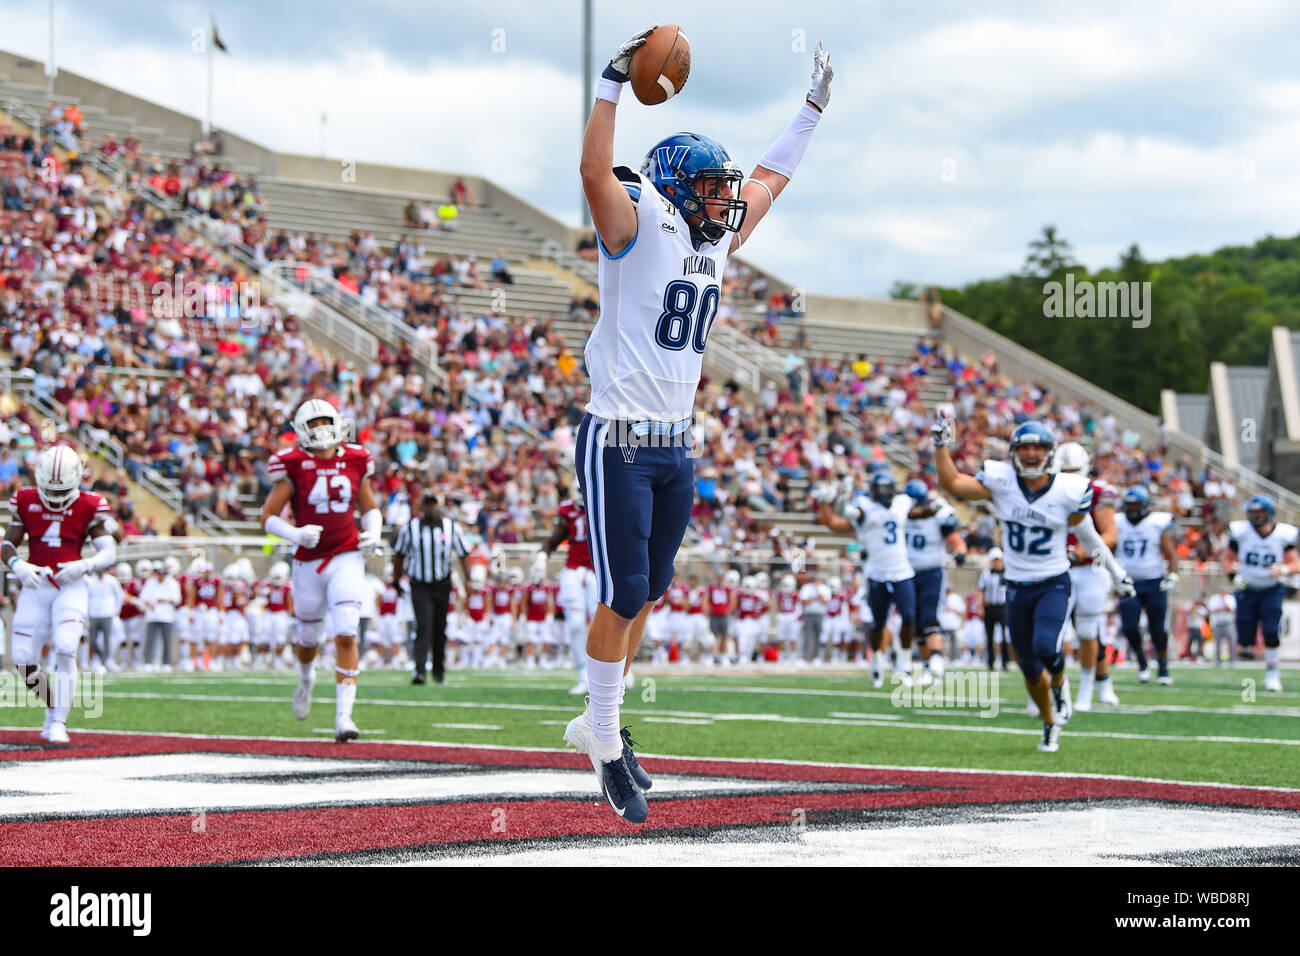 August 24, 2019: Villanova Wildcats wide receiver Andrew Perez (80) celebrates his touchdown against the Colgate Raiders during the first half of an NCAA football game on Saturday, Aug., 24, 2019 at Andy Kerr Stadium in Hamilton, New York. Rich Barnes/CSM Stock Photo